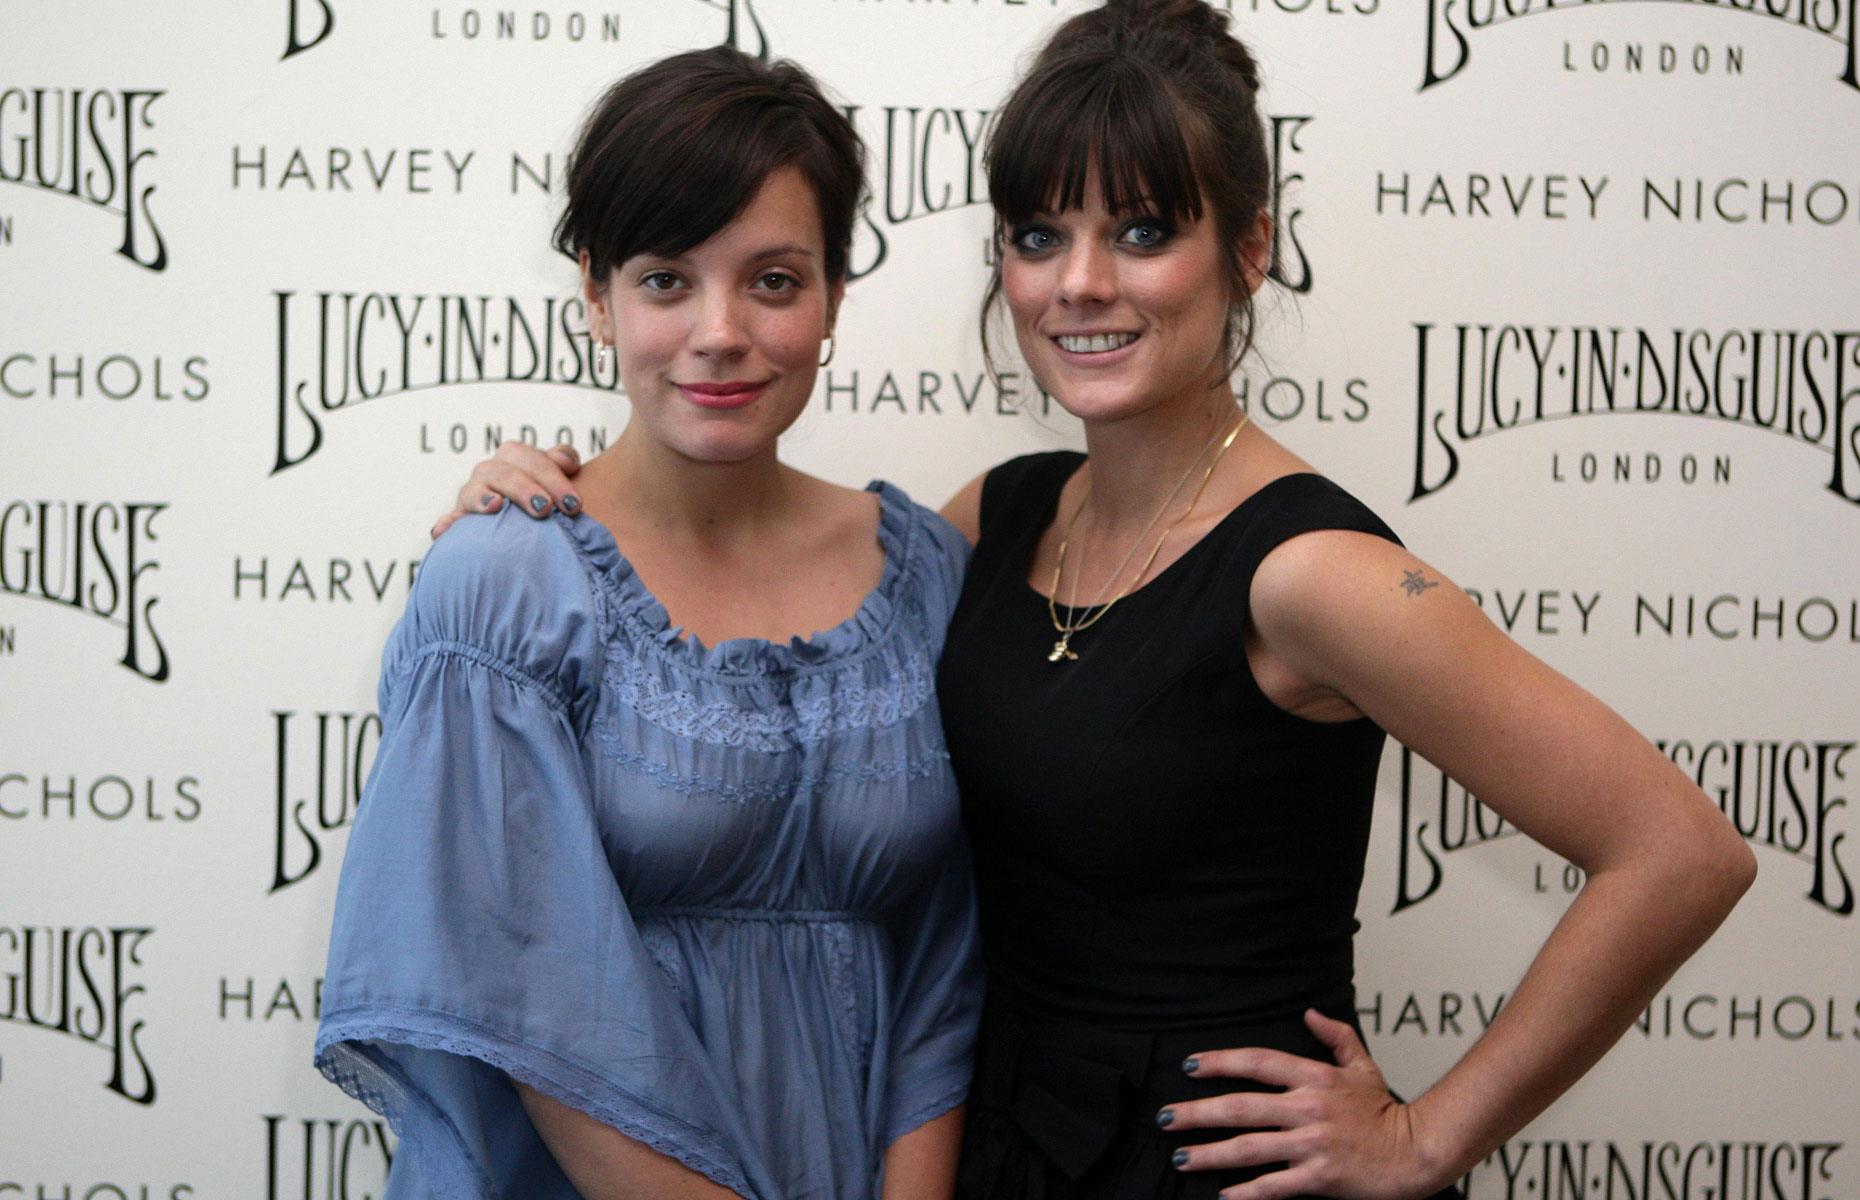 Lily Allen's Lucy In Disguise vintage clothing hire service